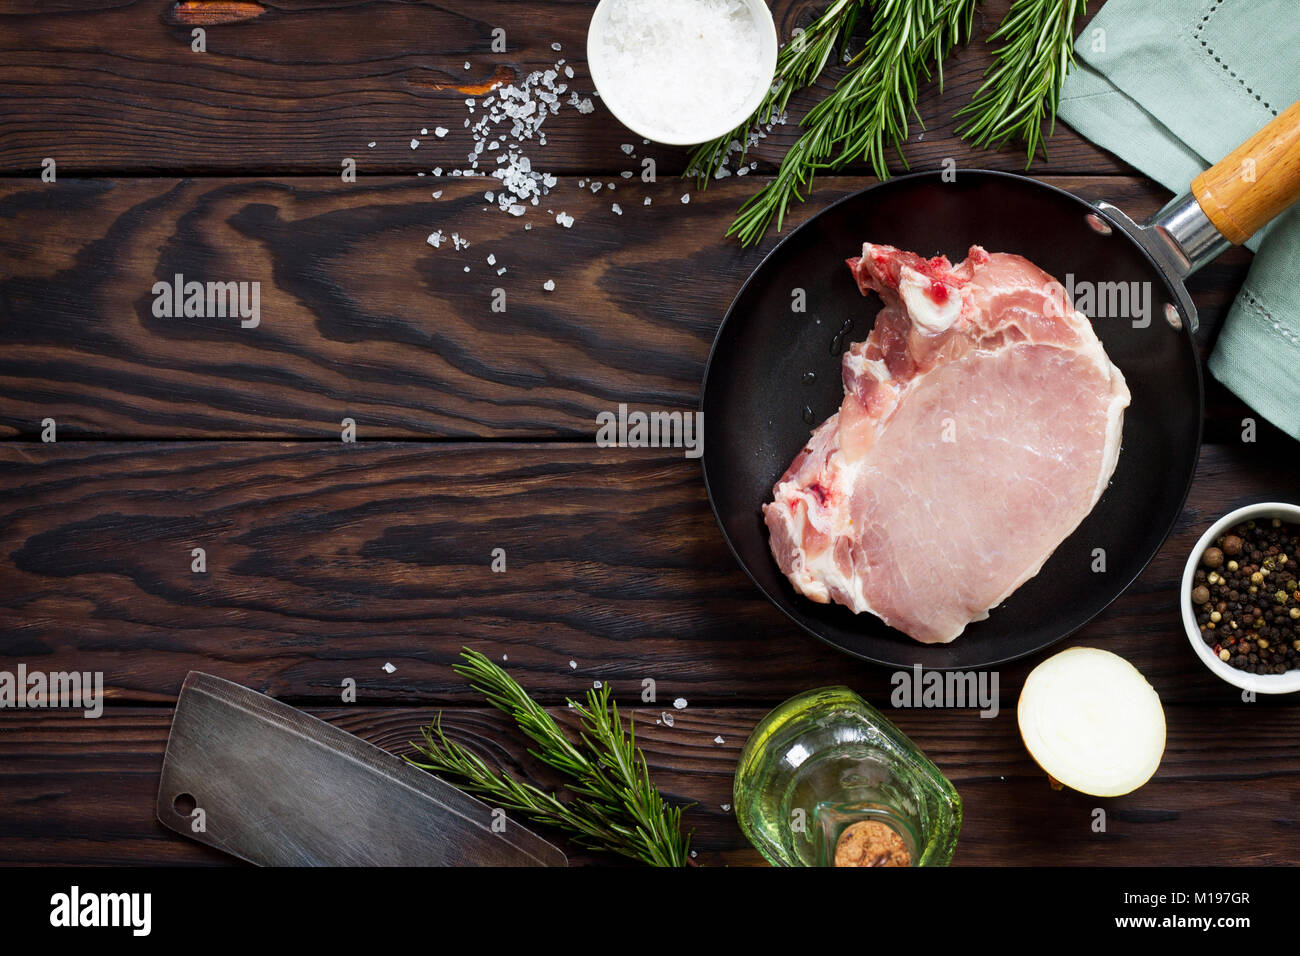 Fresh meat. Raw steak cutlet on a bone on a cast-iron frying pan, olive oil, spices and fresh rosemary on the kitchen table. Stock Photo